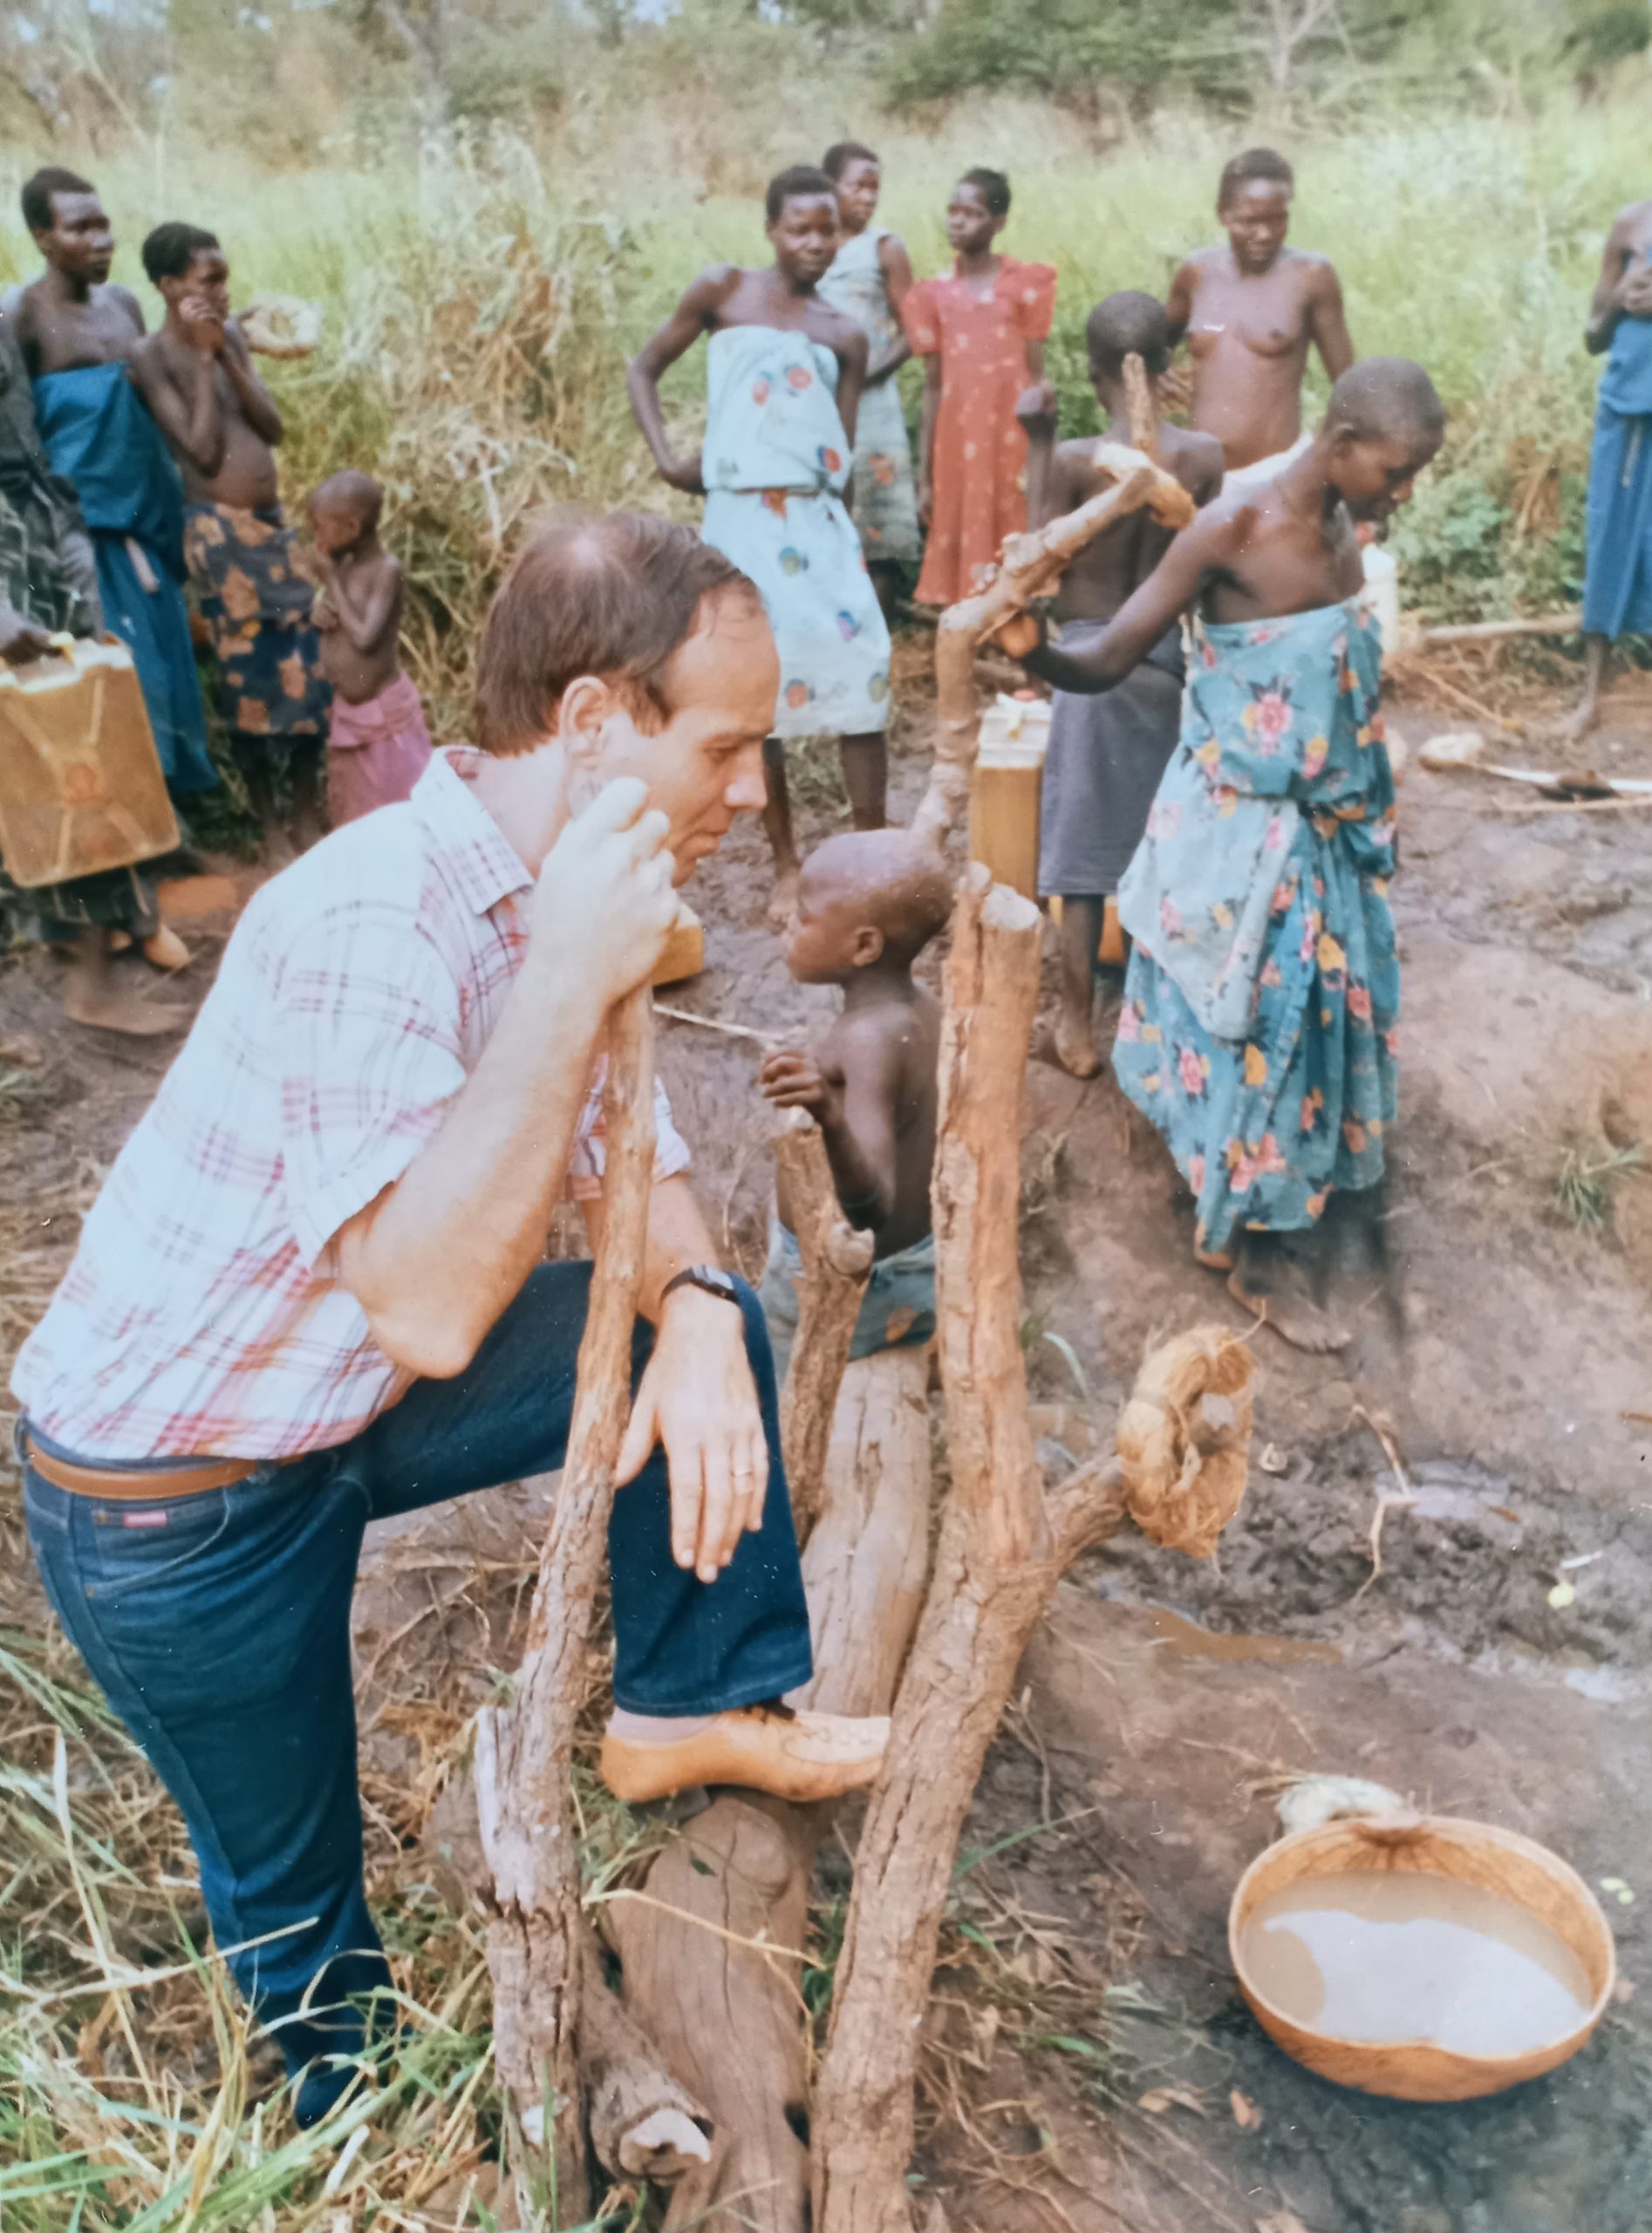 Filippo Ciantia - Limule: Dr. I. Rizzo looks at the water from the shallow well, collected in a calabash, and containing cyclops, the intermediary host of Guinea Worm